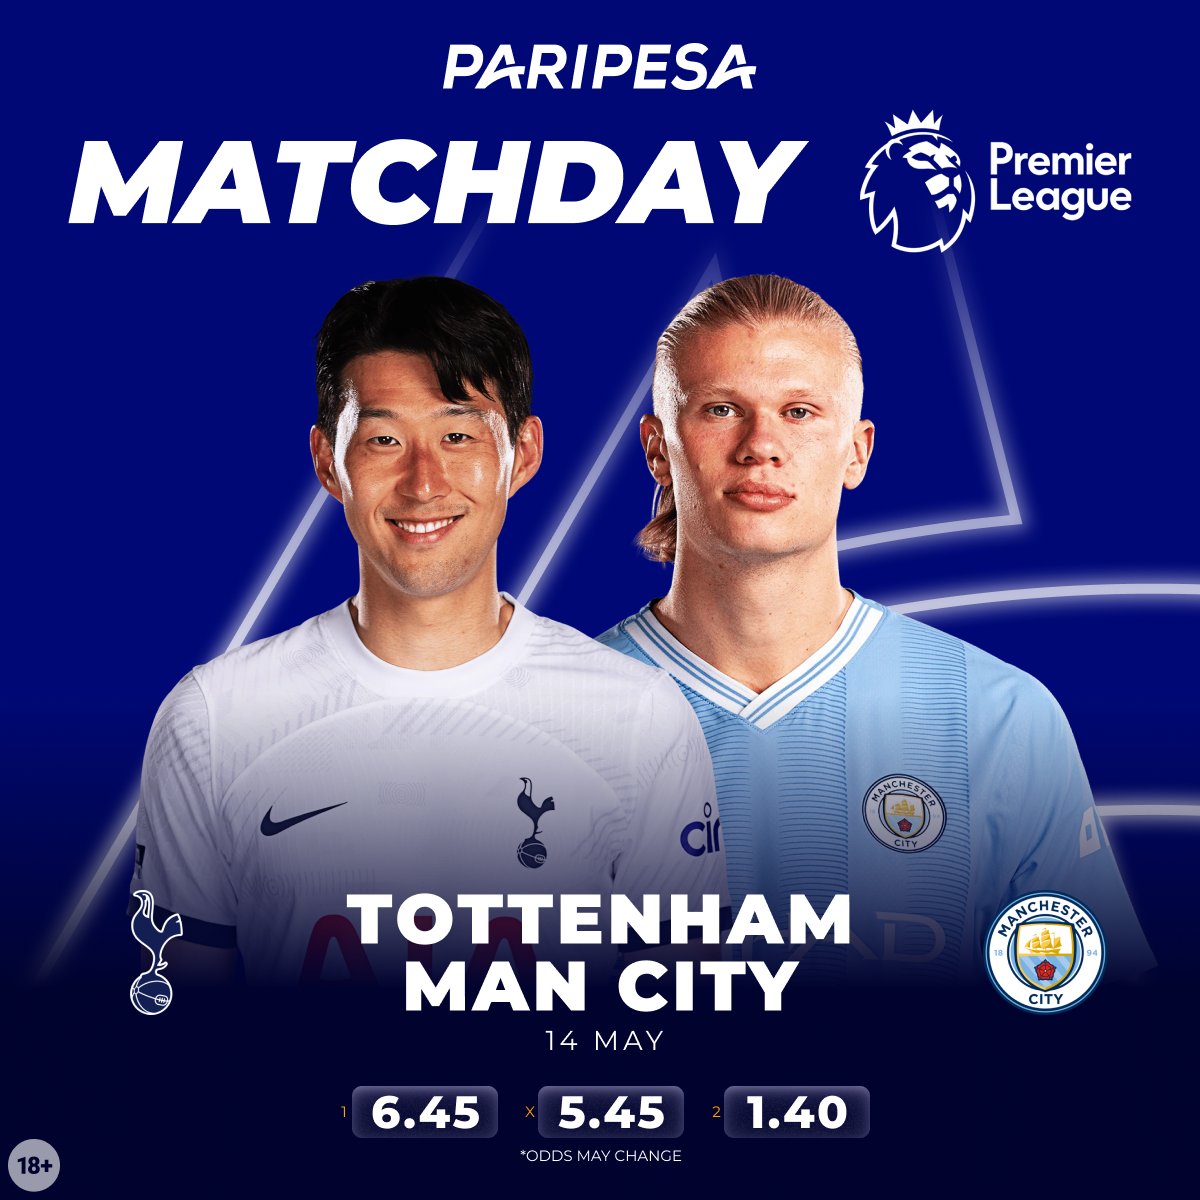 🦁 Premier League! 🤔 If Manchester City wins, it greatly increases their chances of winning the trophy! 📺 Let's watch another cool match performed by English teams ⚽ m.paripesa.bet/e60 #EPL #premierleague